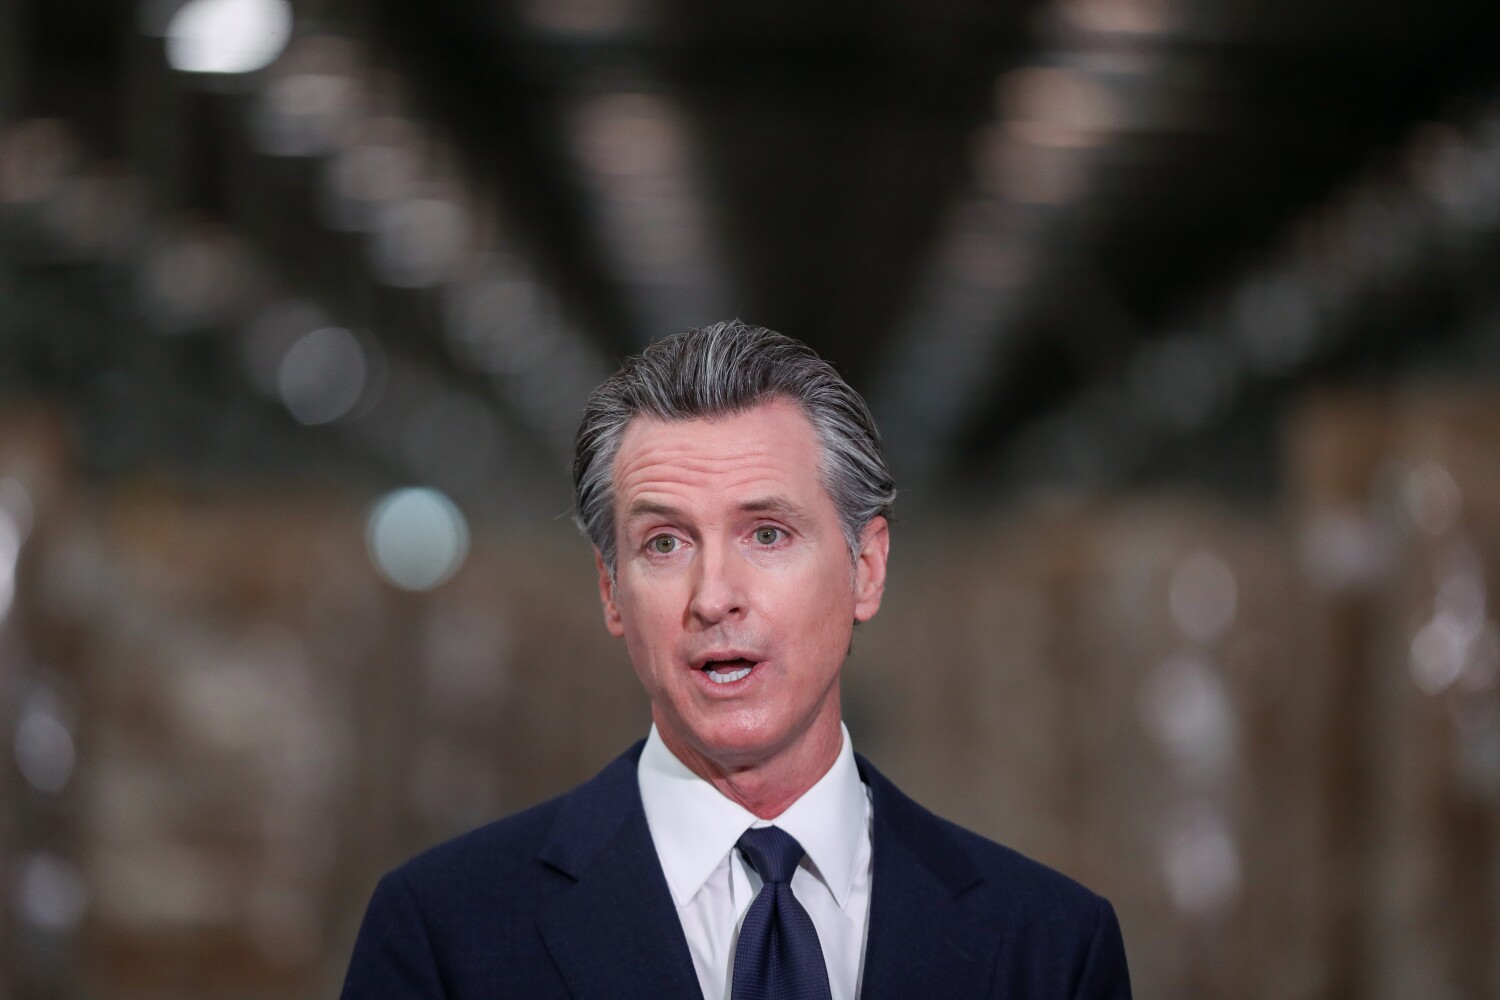 California Gov. Newsom wasnt first to call for sanctions on Russia. But it was the right move